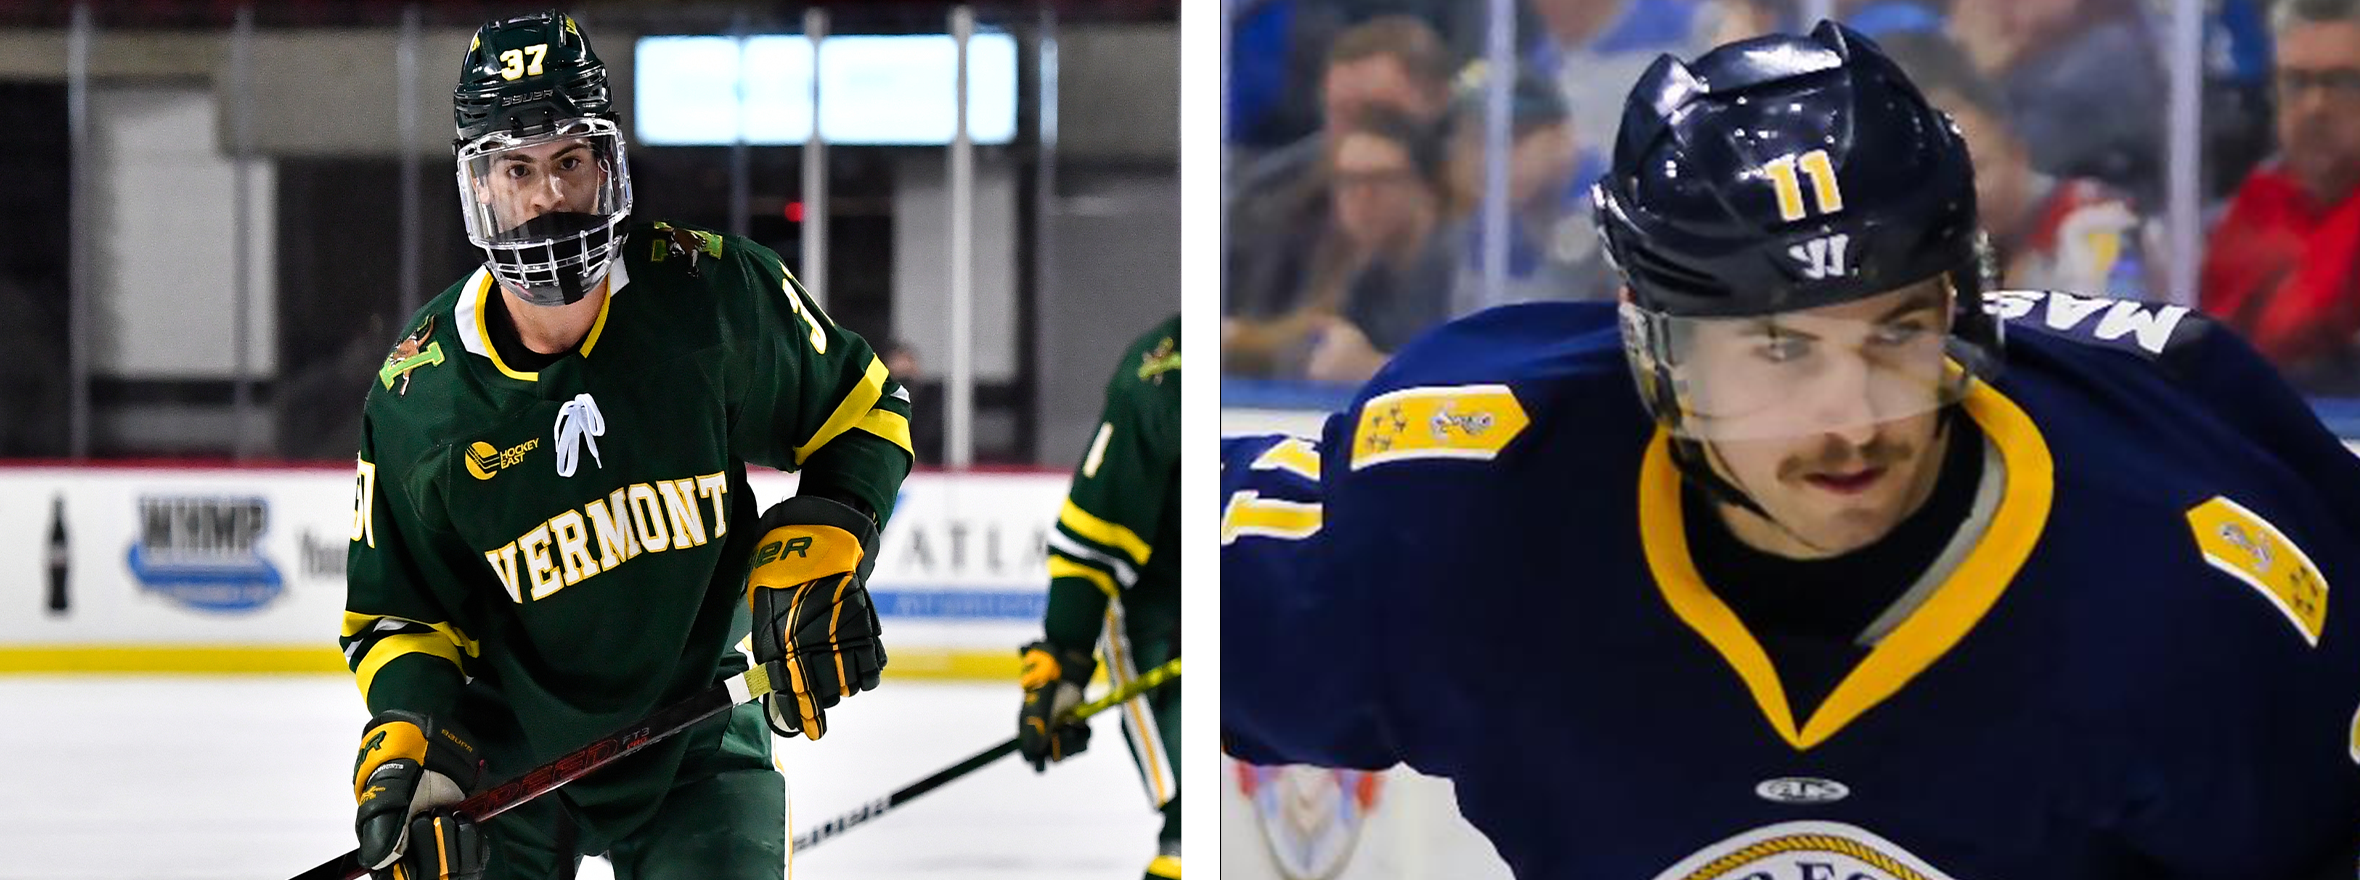 COMETS ADD TWO NEW JERSEY SIGNINGS